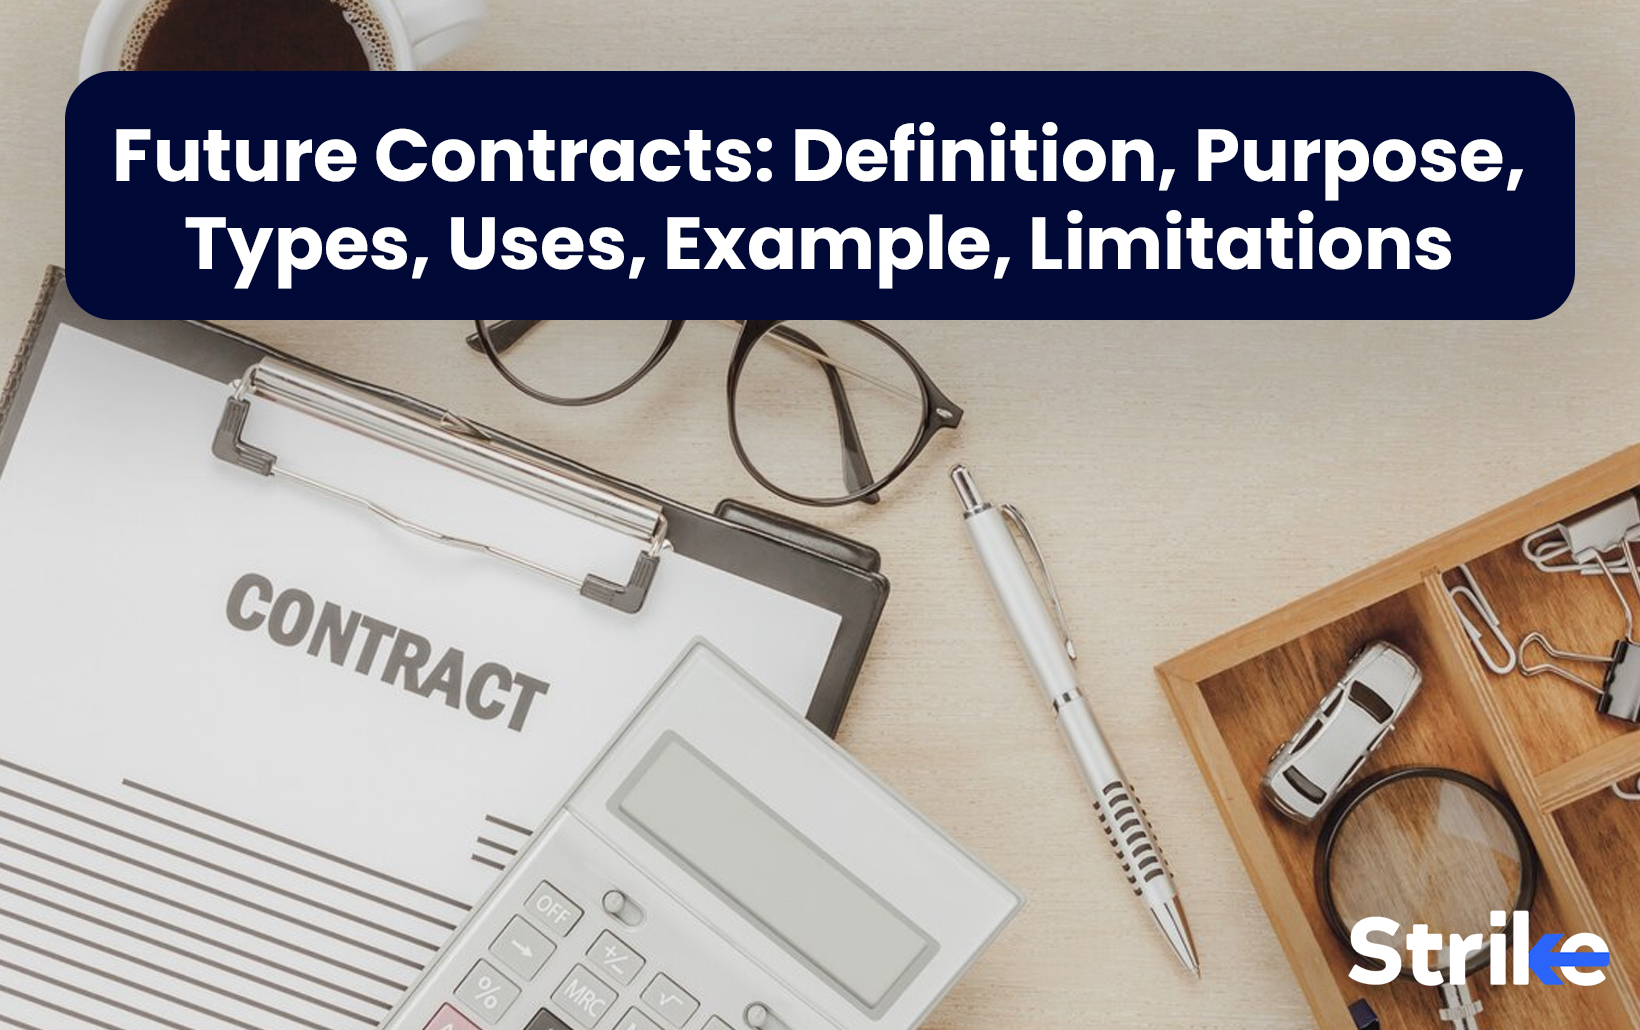 Future Contracts: Definition, Purpose, Types, Uses, Example, Limitations